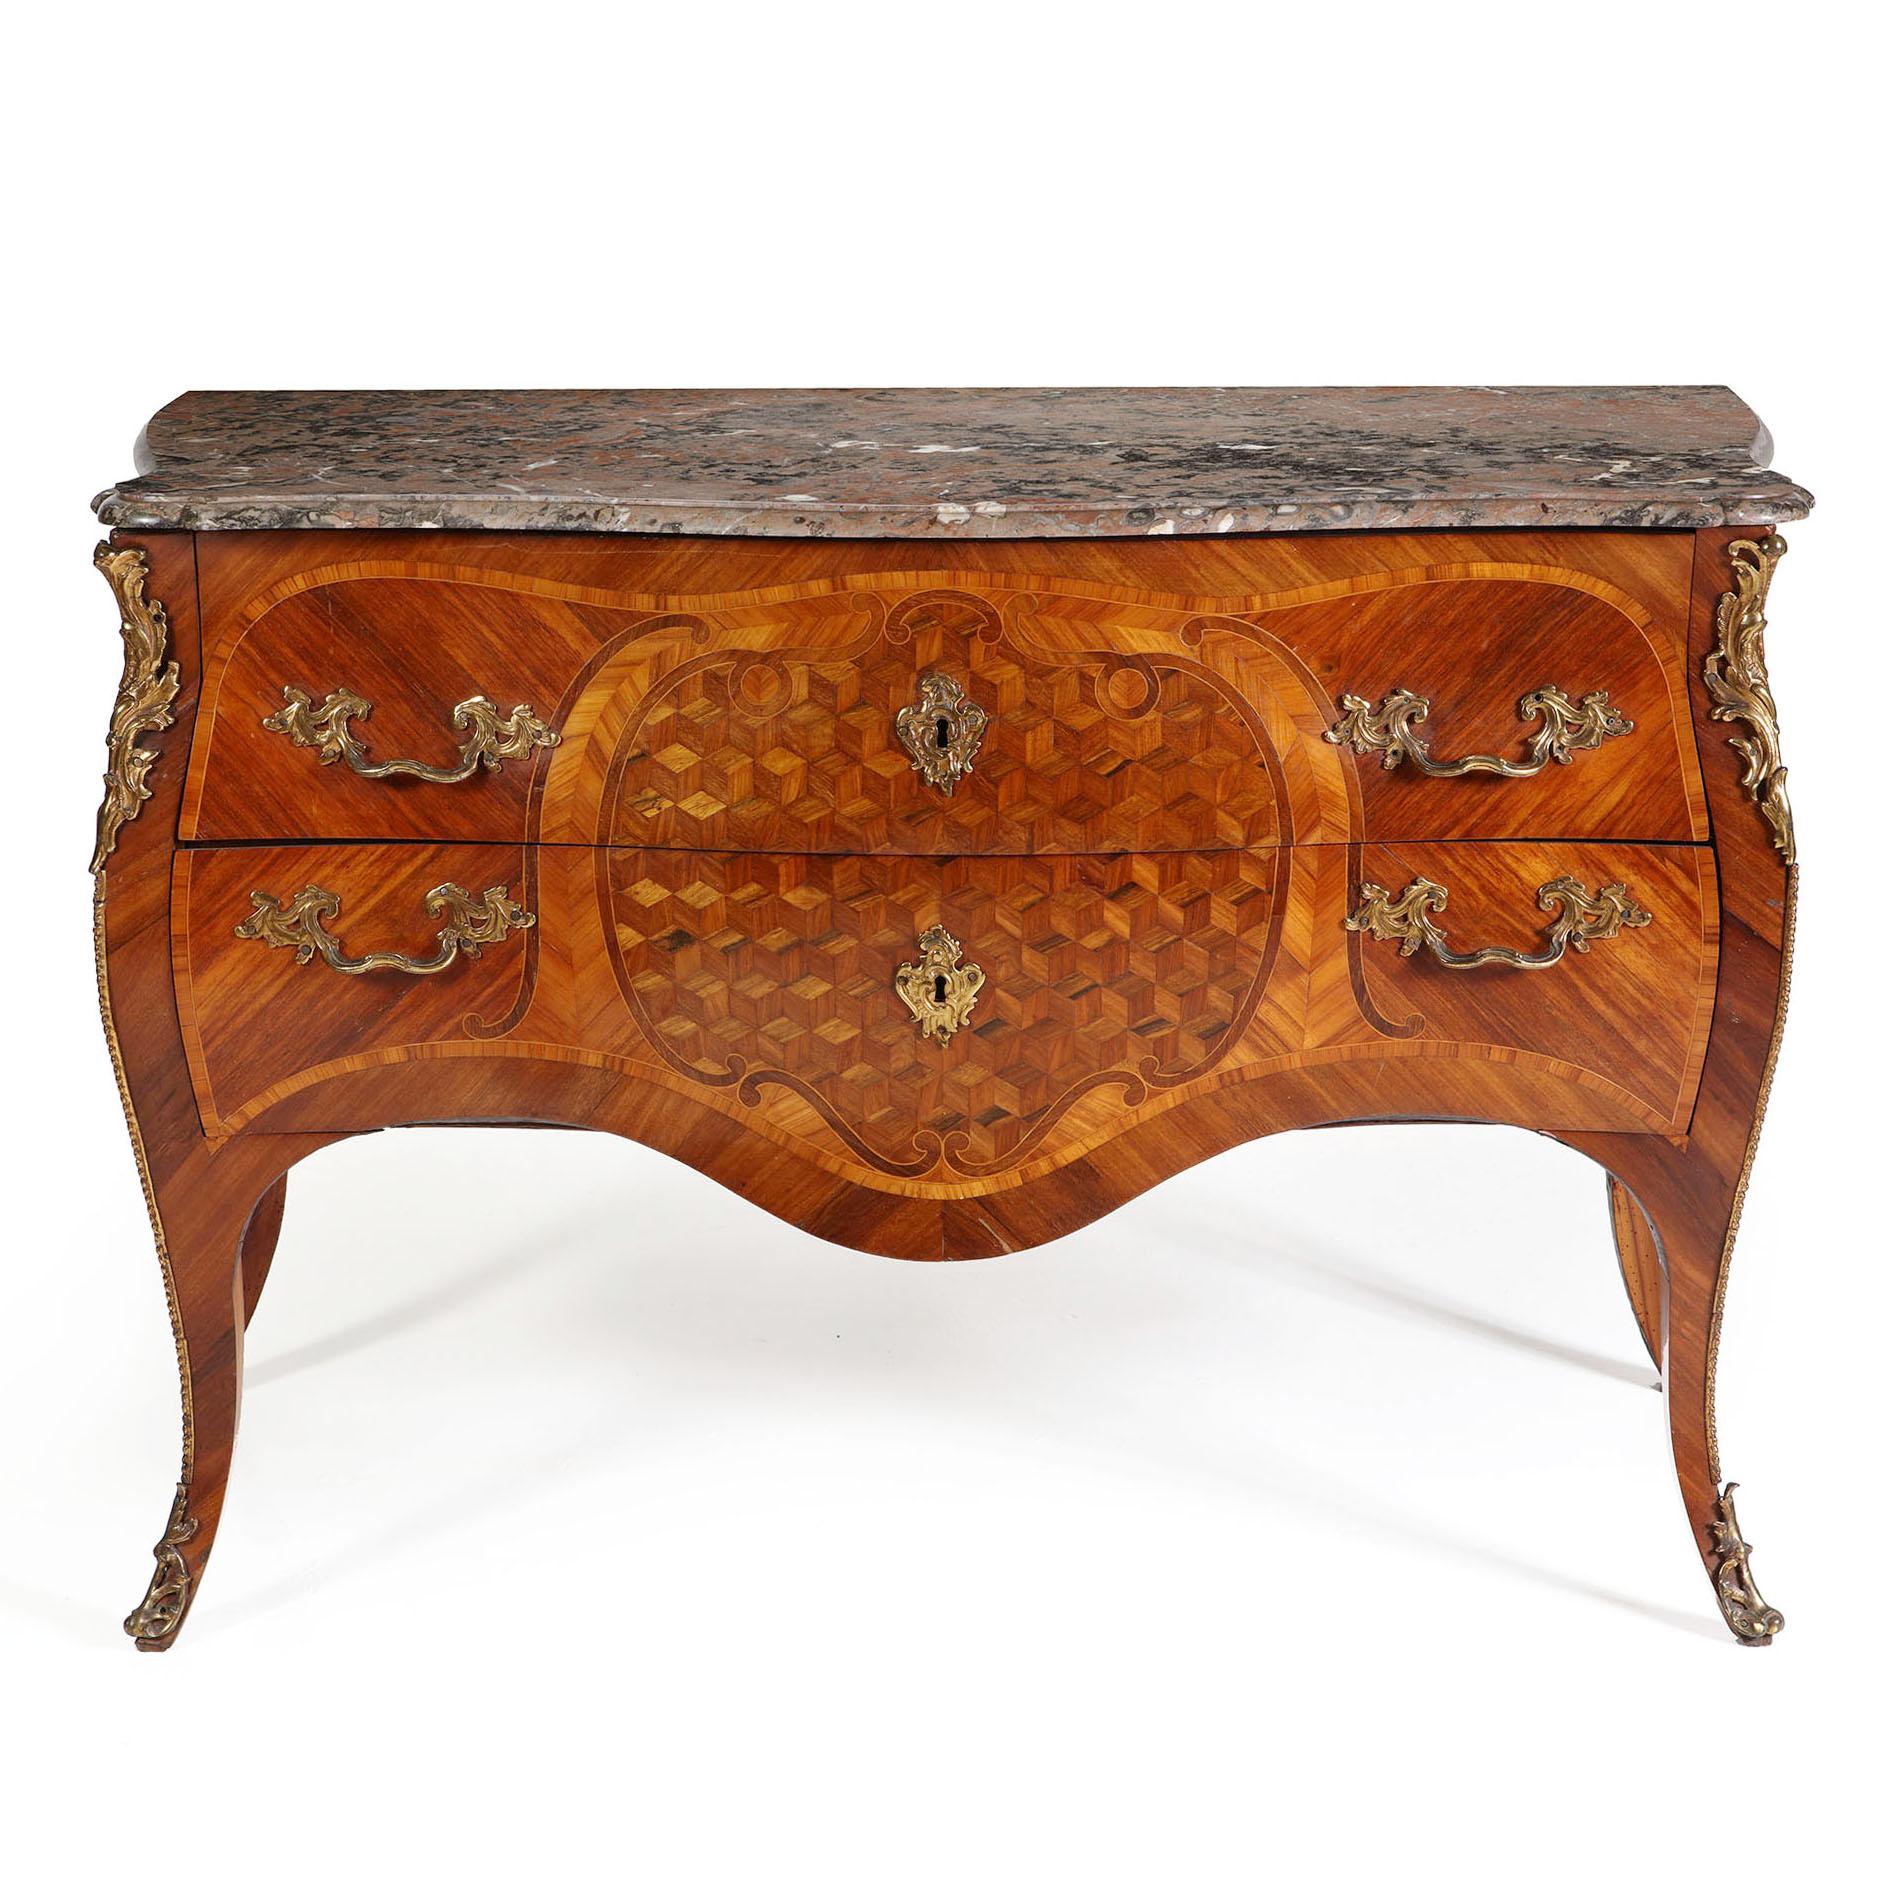 Dutch Rococo Bombe Parquetry Commode, 18th Century In Good Condition For Sale In London, by appointment only